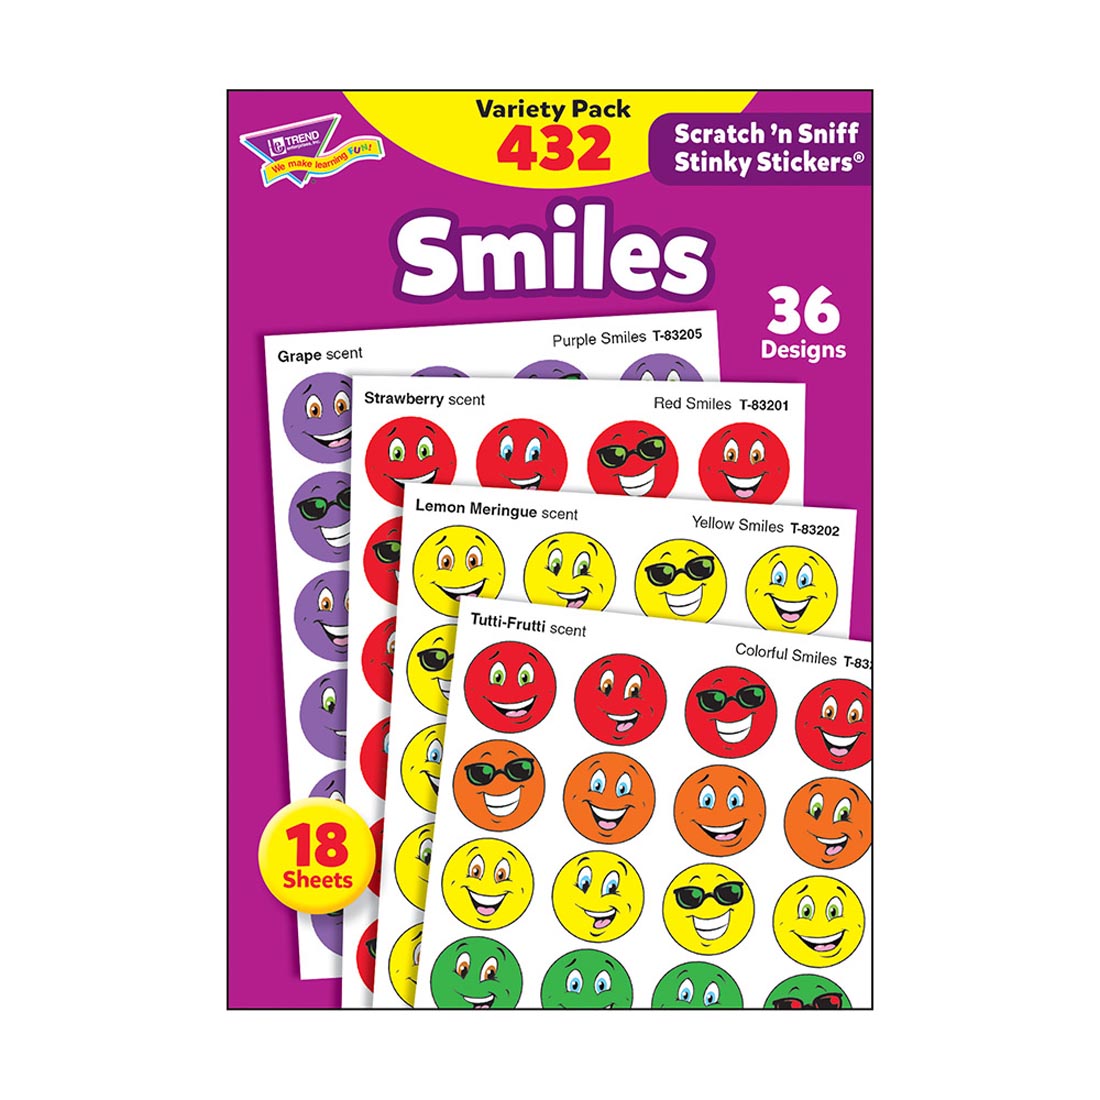 Smiles Variety Pack TREND Scratch 'n Sniff Stinky Sticker Variety Pack